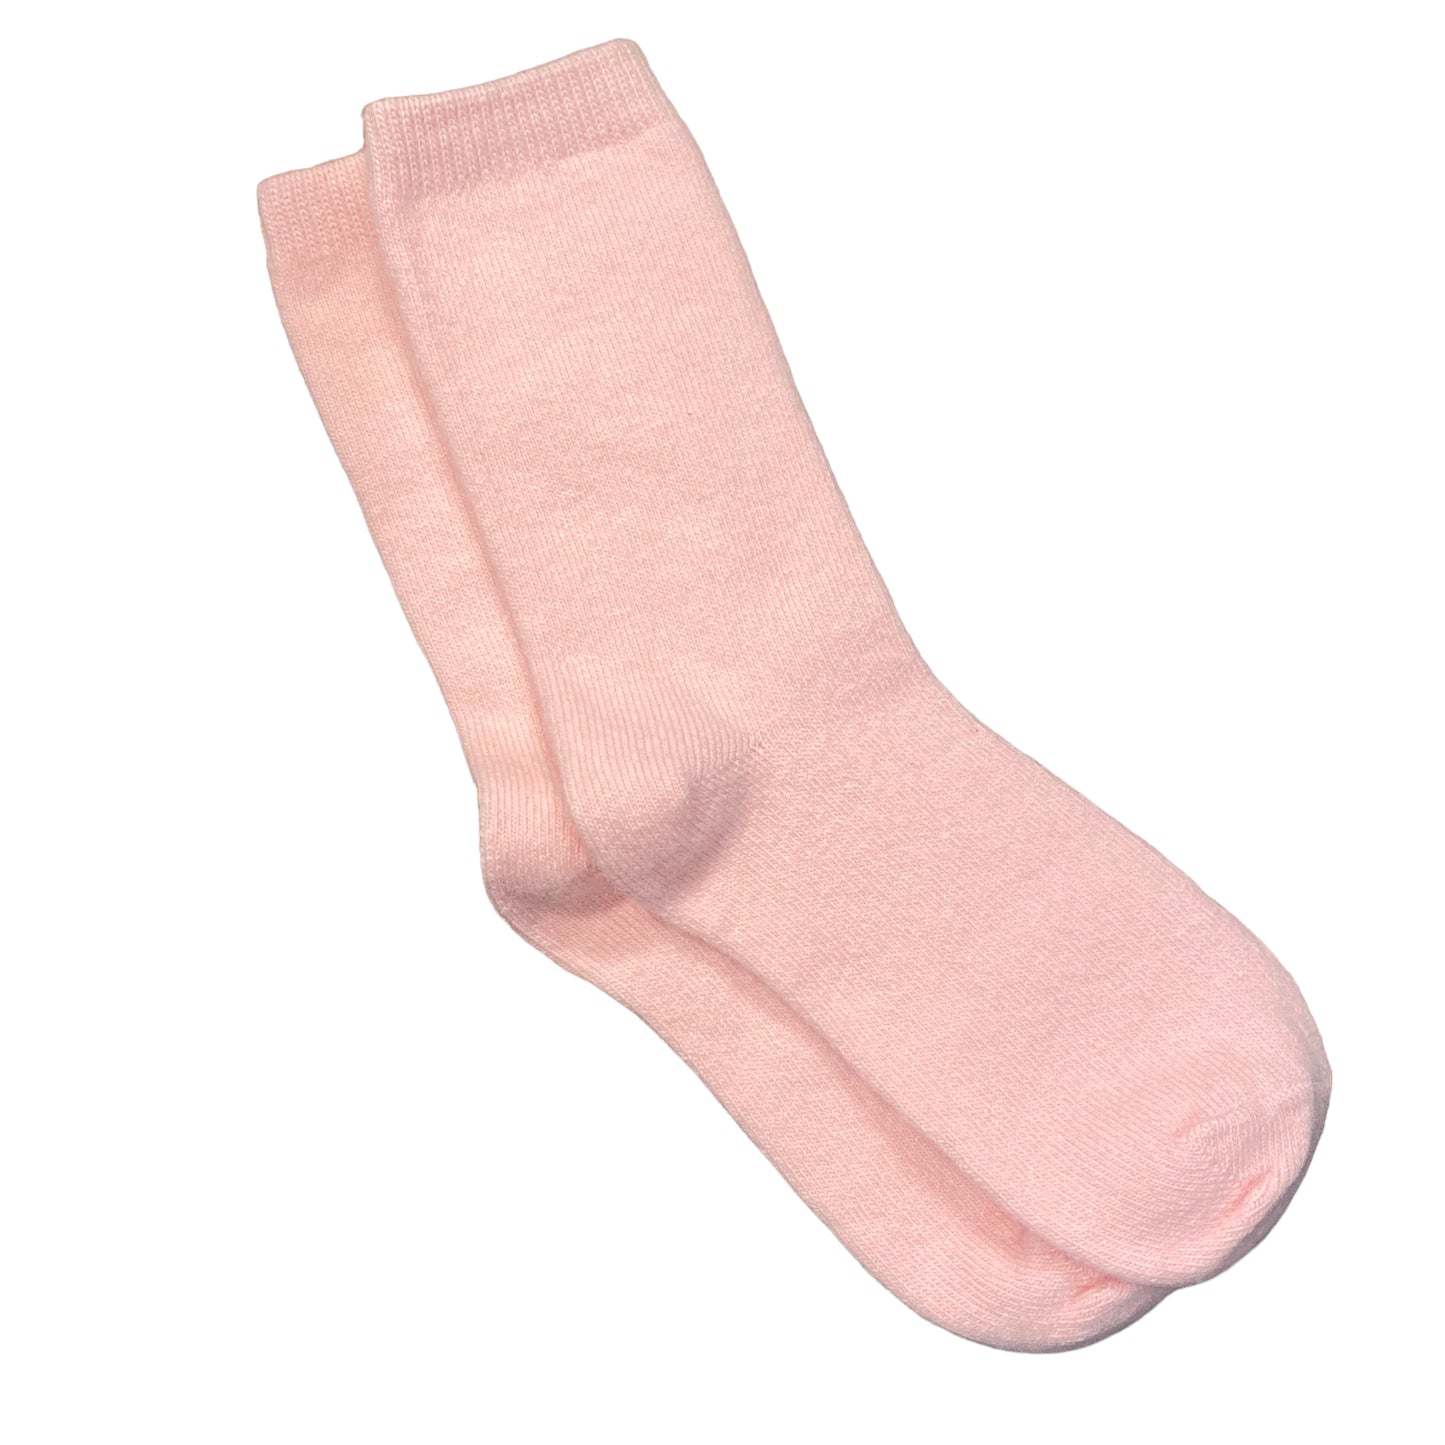 Women's Cashmere Lambswool Blend Socks - Pinks and Tan (3 Pairs)